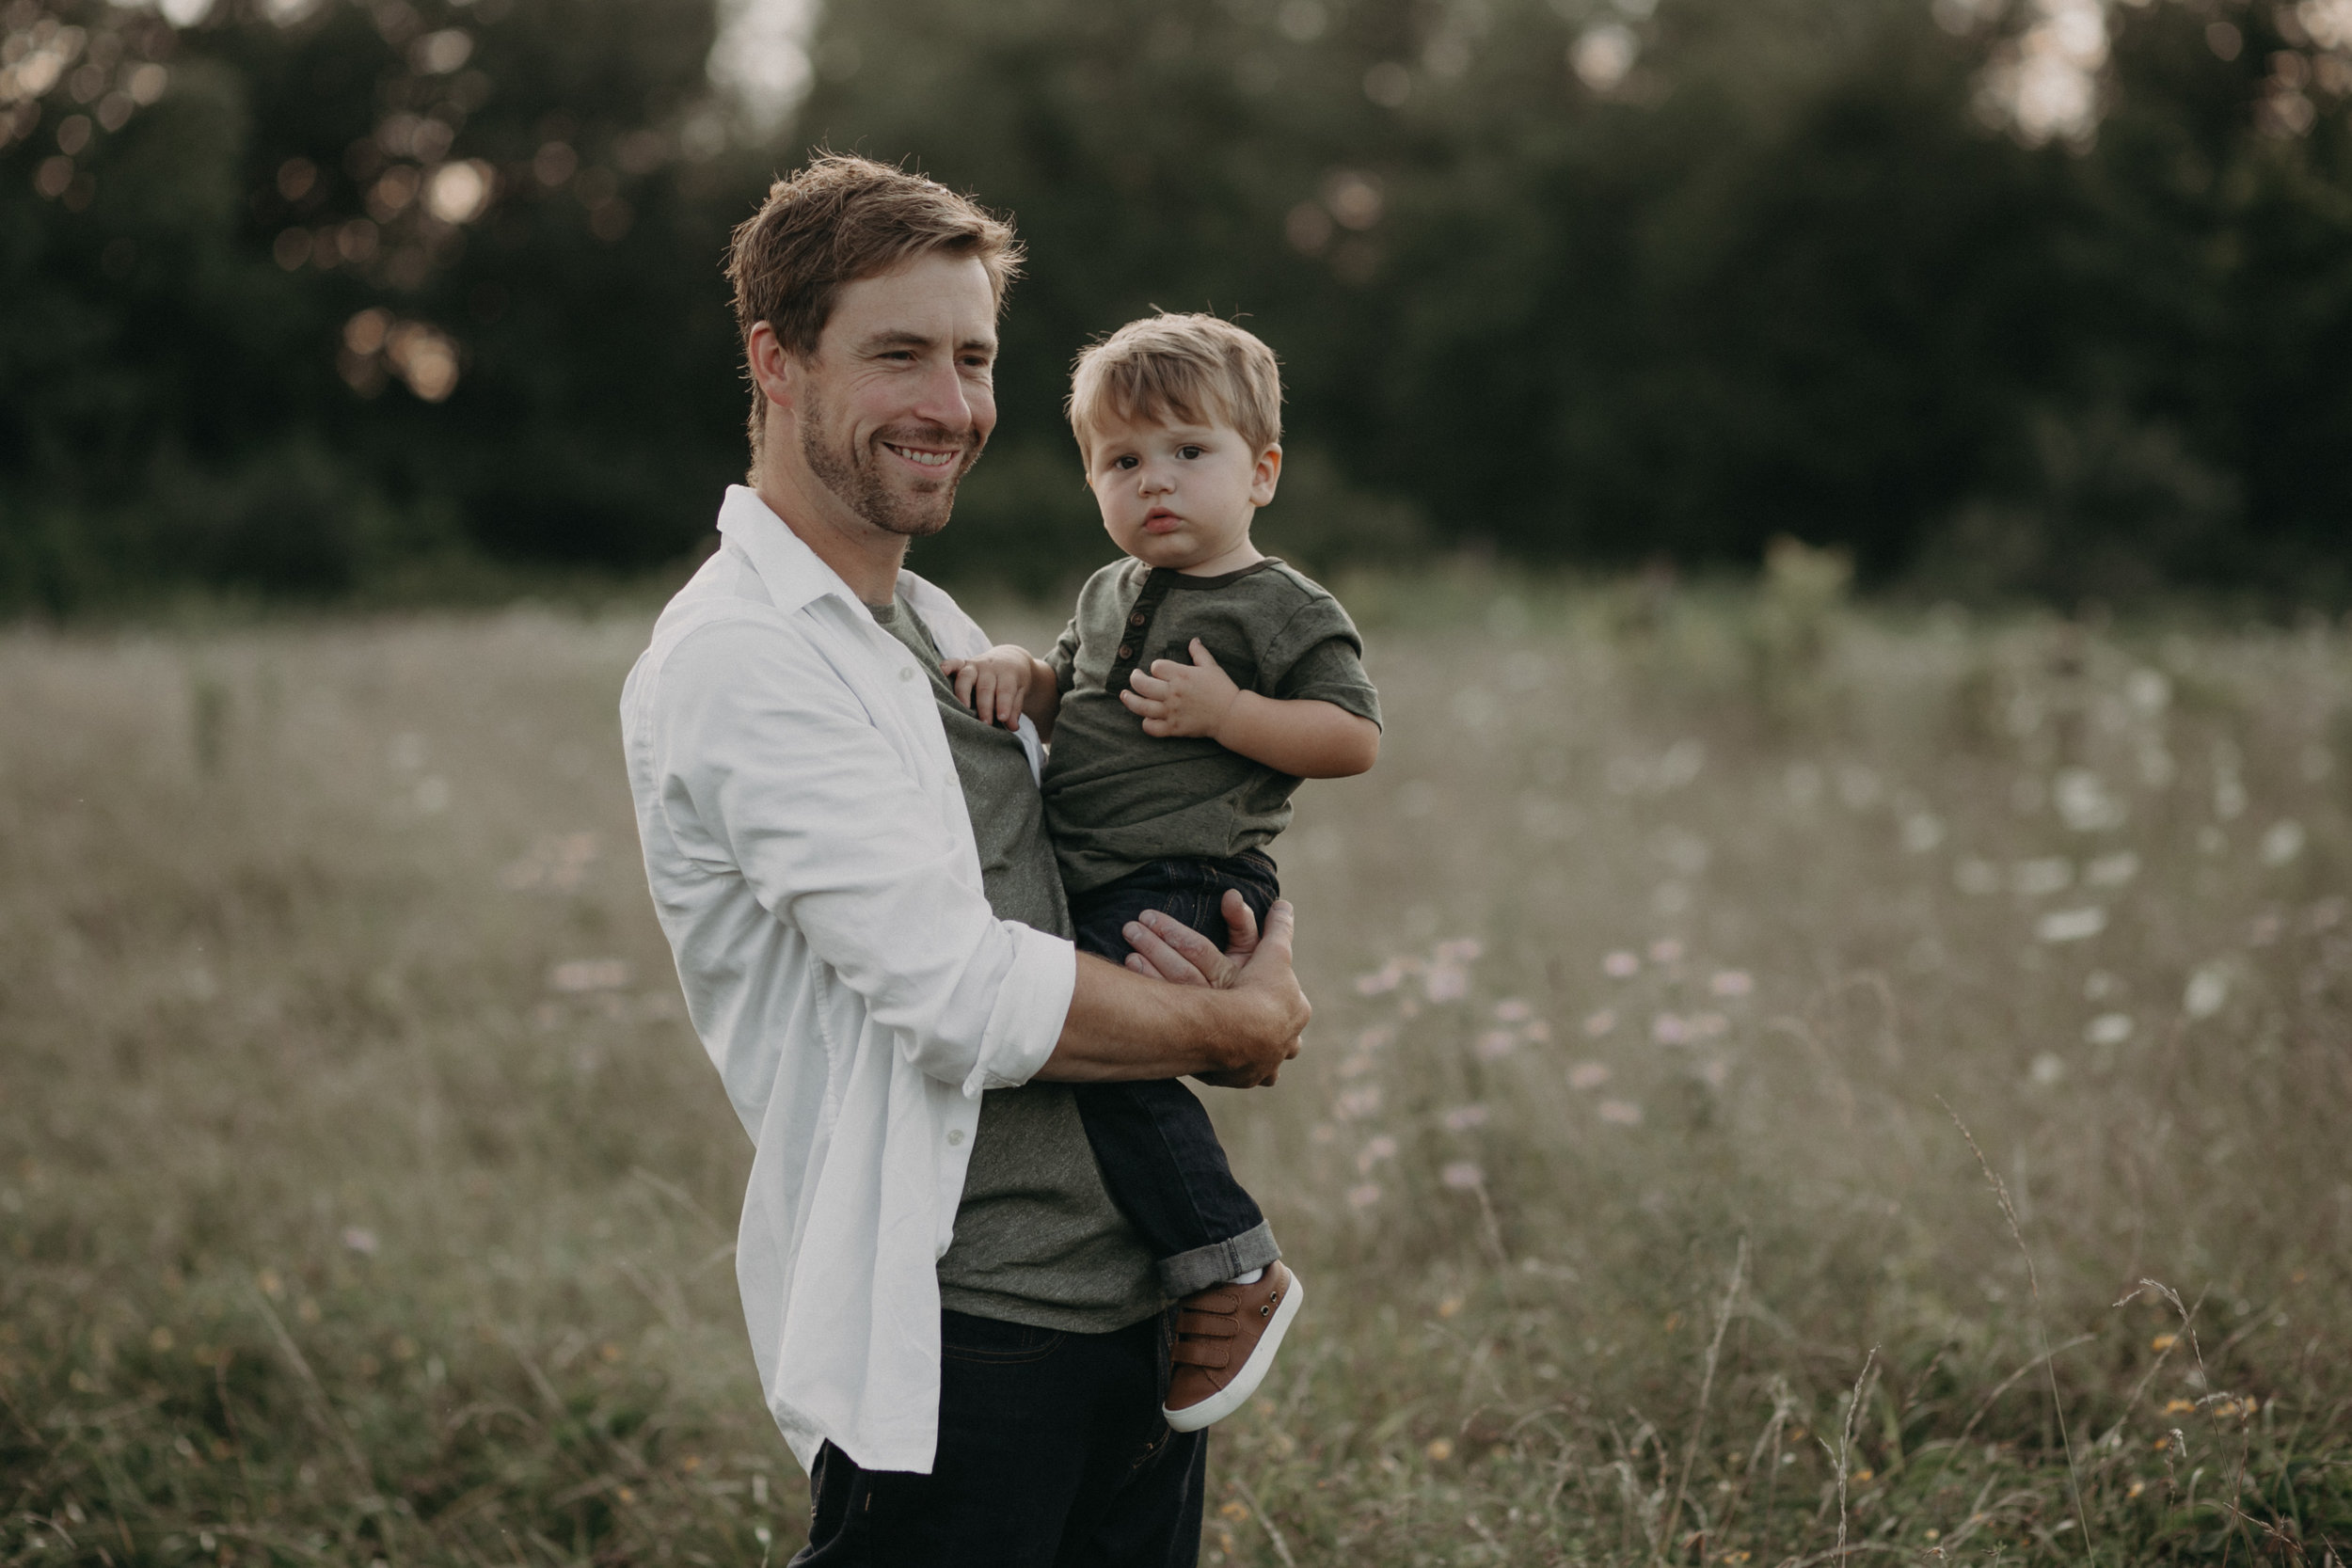  Daddy holding toddler son and smiling in field 